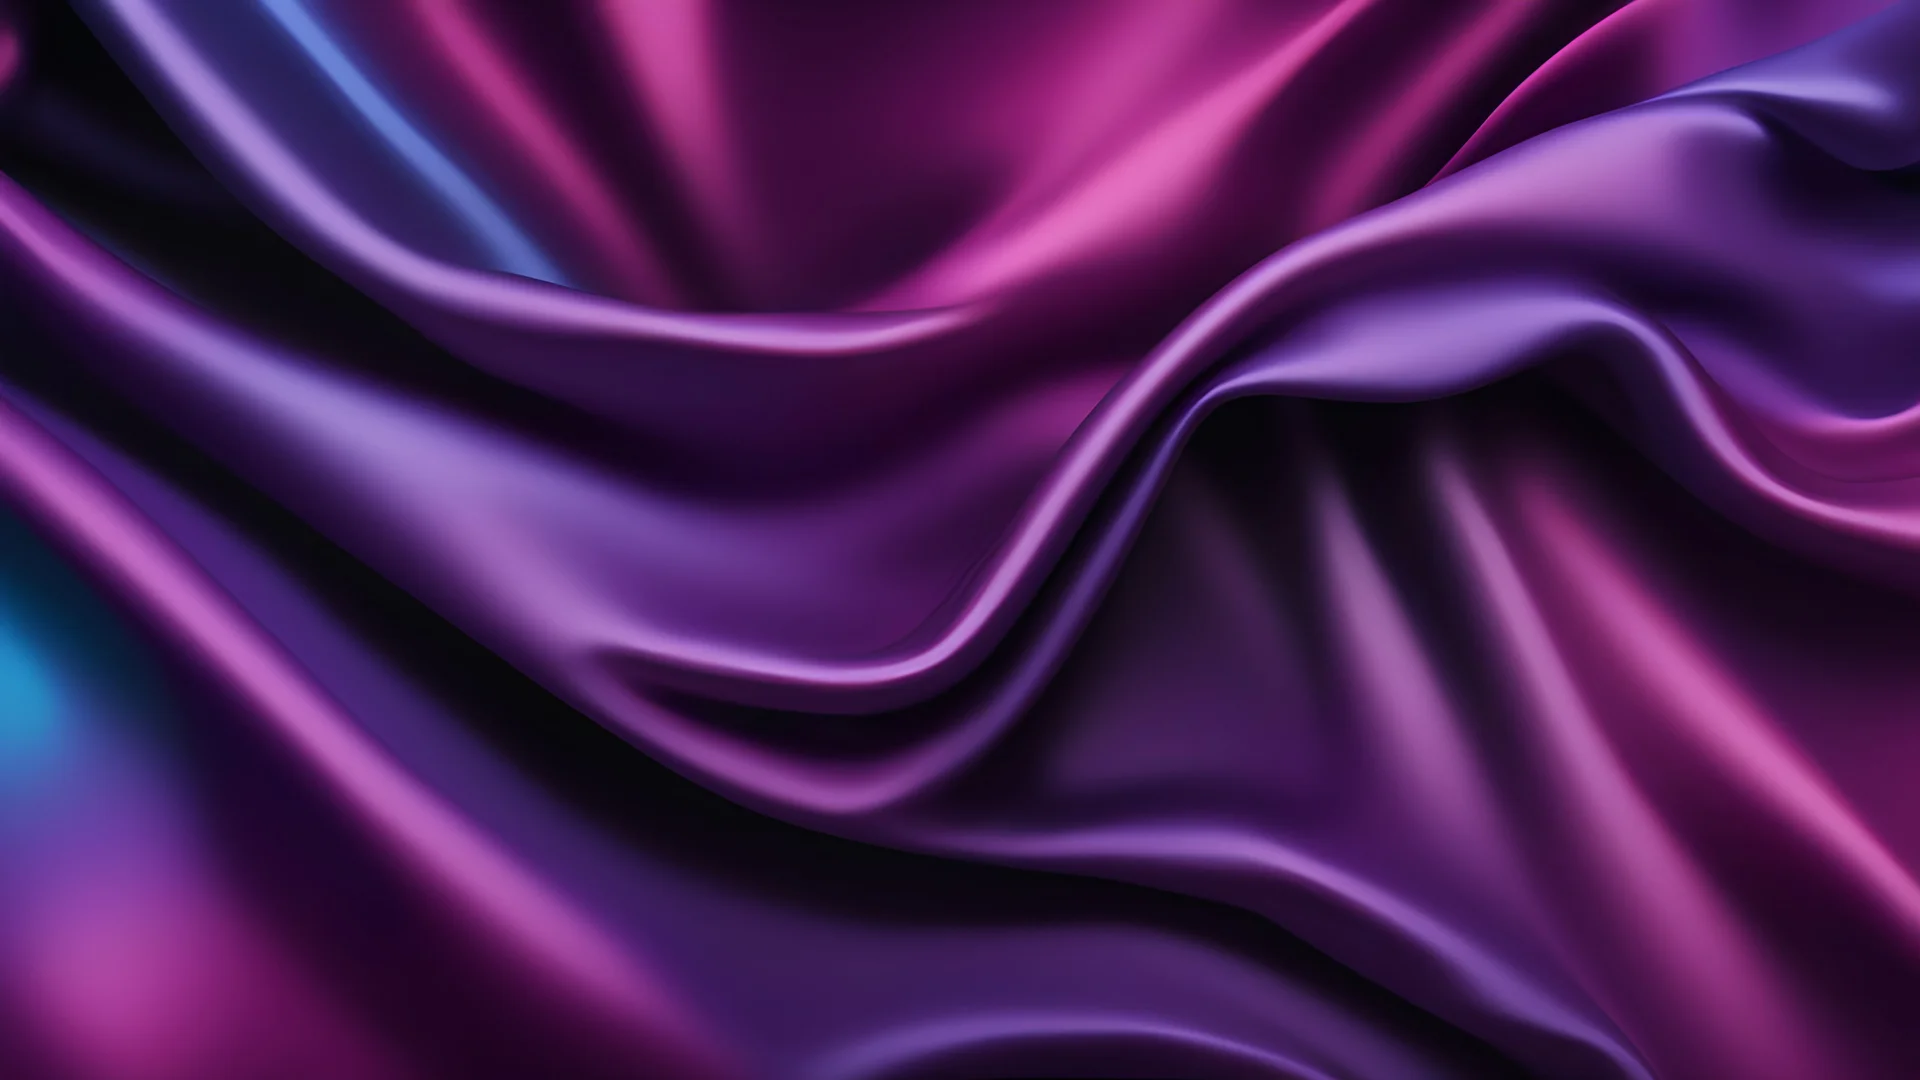 Black blue violet purple maroon red magenta silk satin. Color gradient. Abstract background. Drapery, curtain. Folds. Shiny fabric. Glow glitter neon electric light metallic. Line stripe. Wide banner.